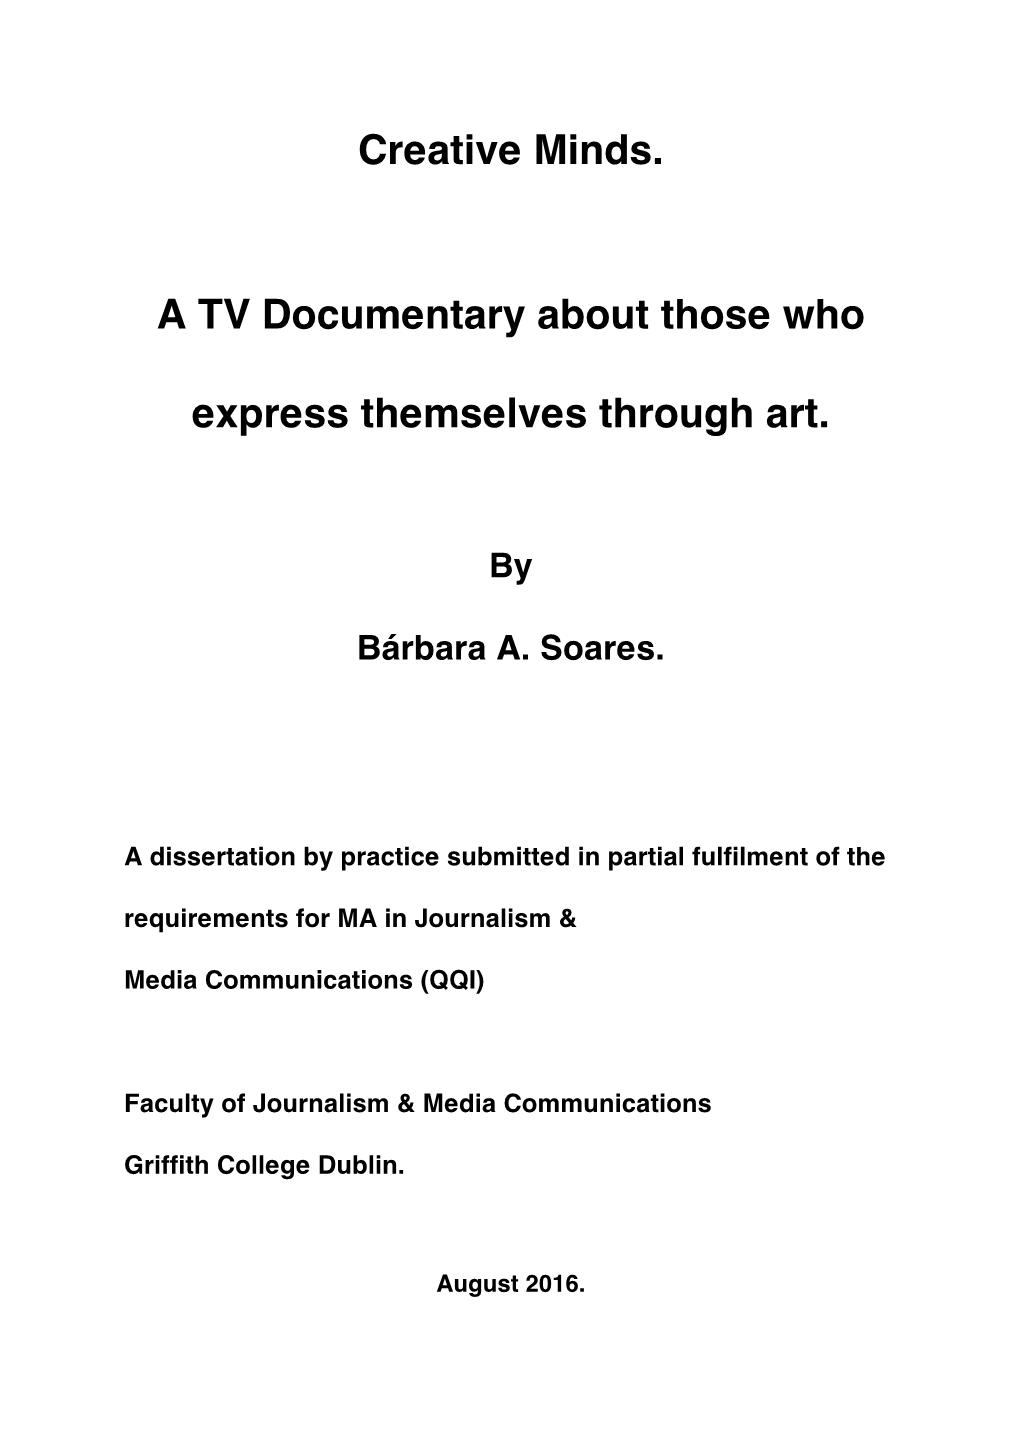 Creative Minds. a TV Documentary About Those Who Express